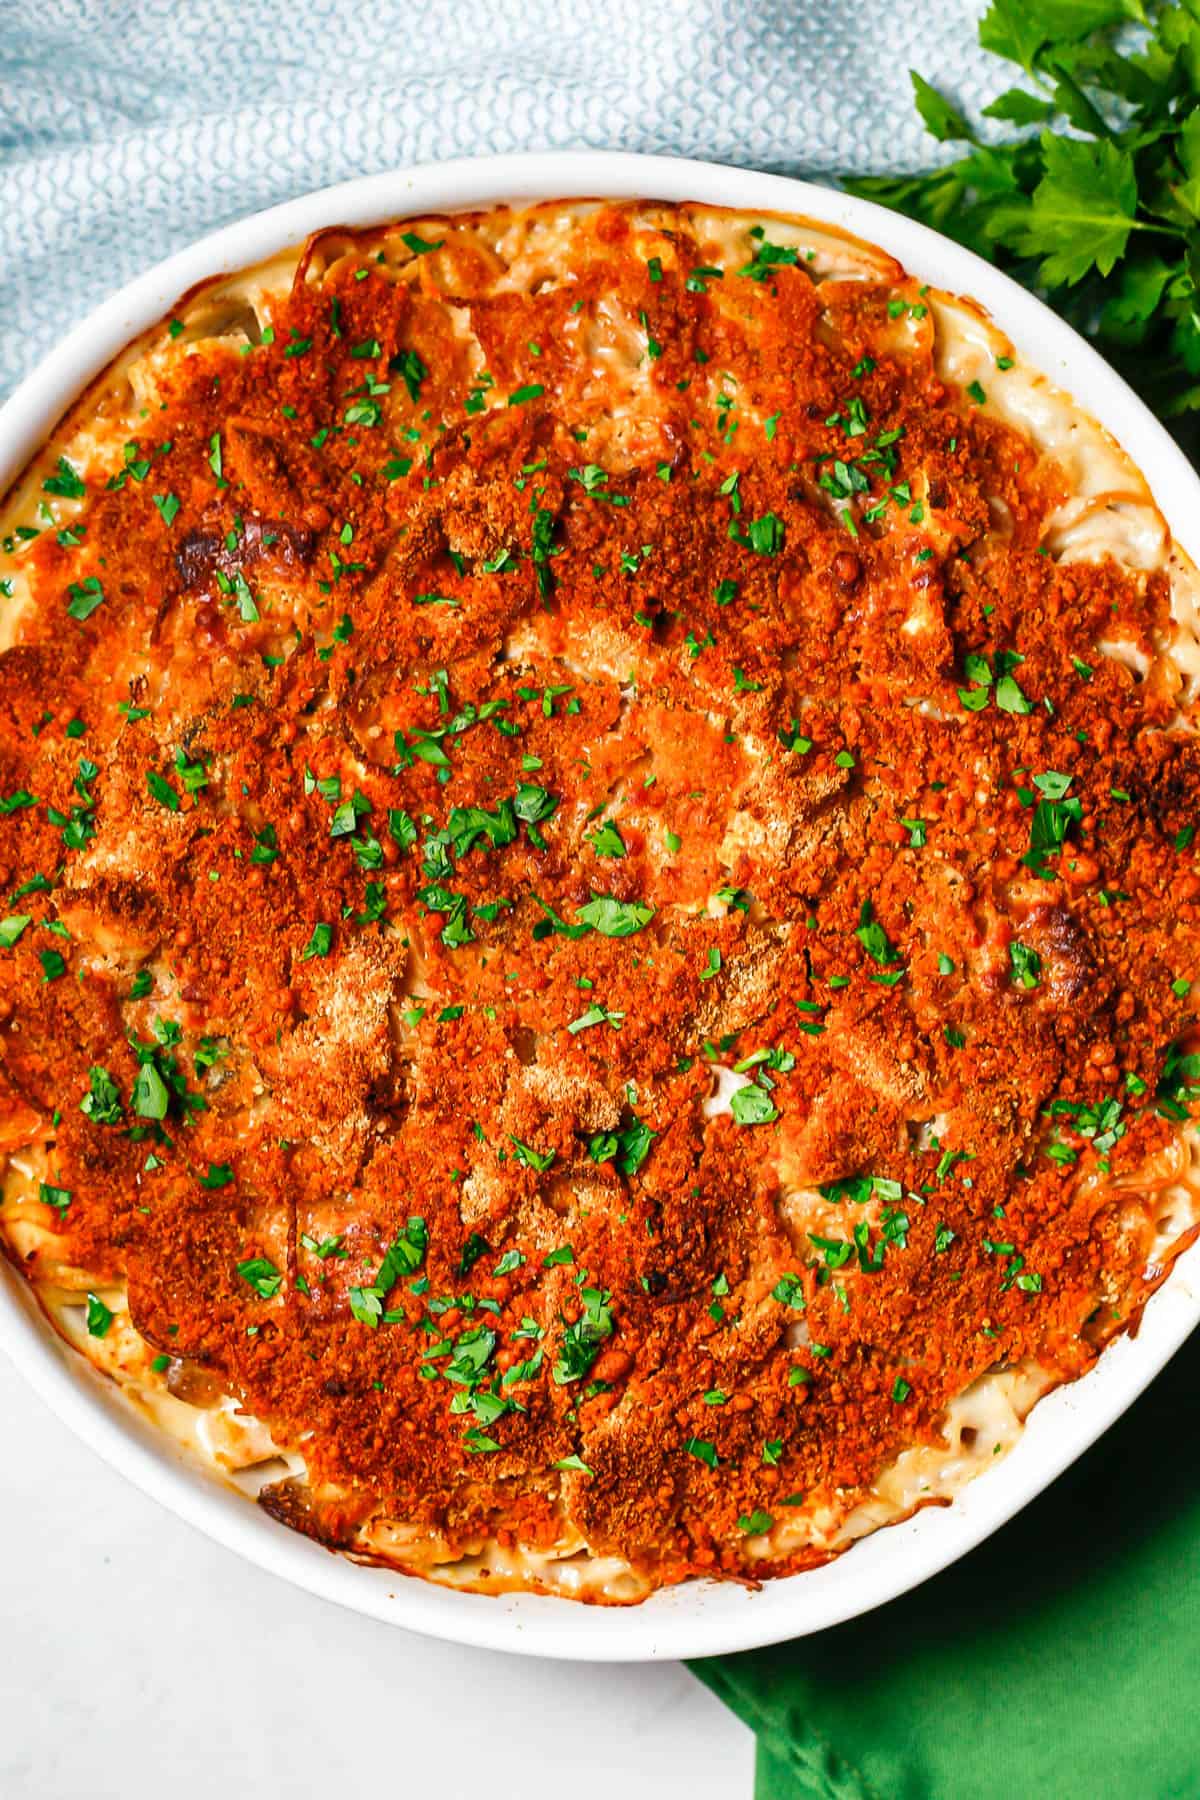 Creamy baked chicken tetrazzini in a round white casserole dish with a golden brown topping and parsley sprinkled on top.